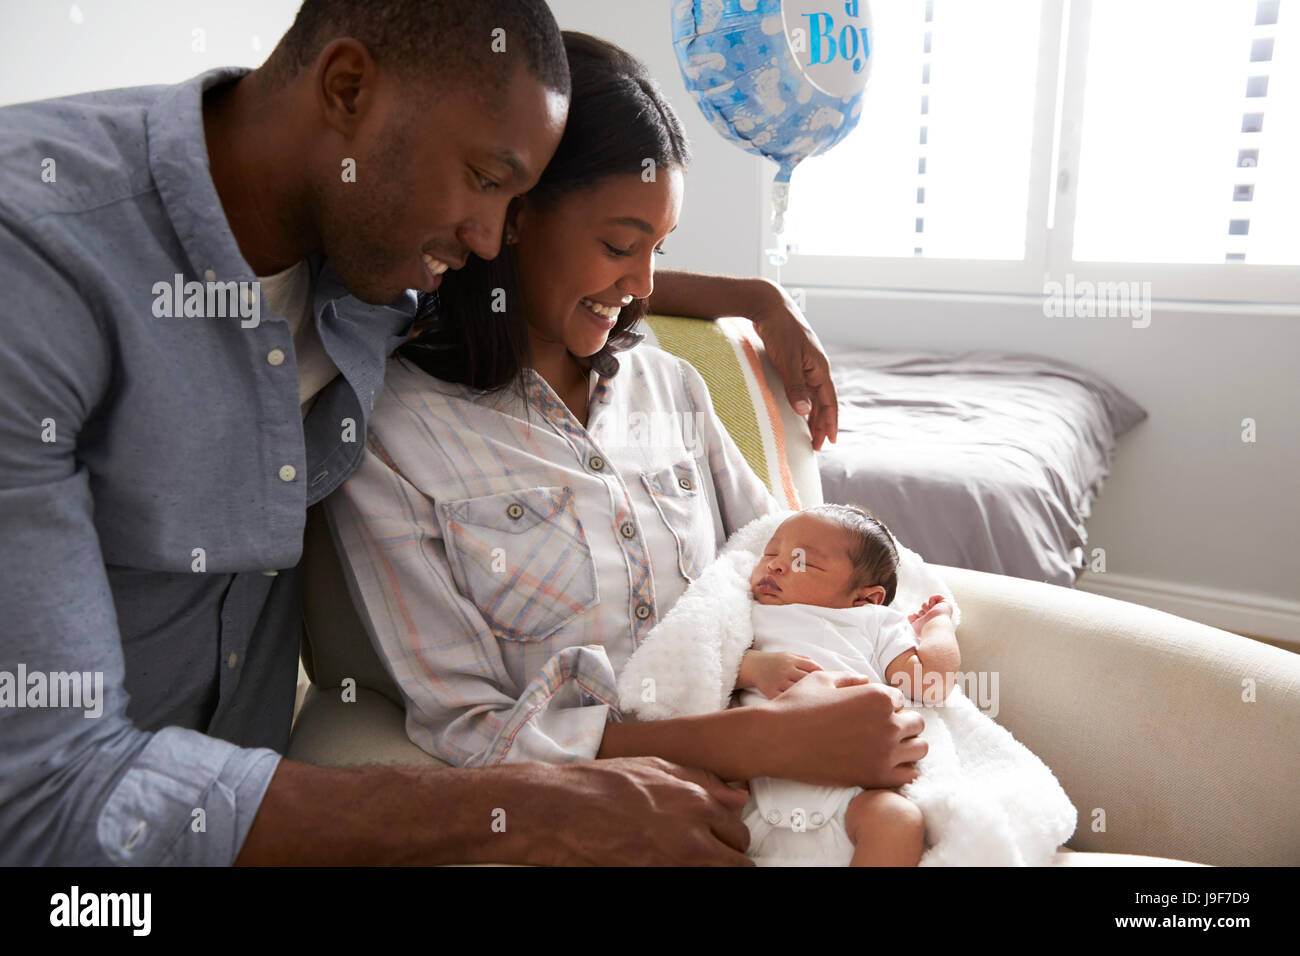 Parents Home from Hospital With Newborn Baby In Nursery Stock Photo